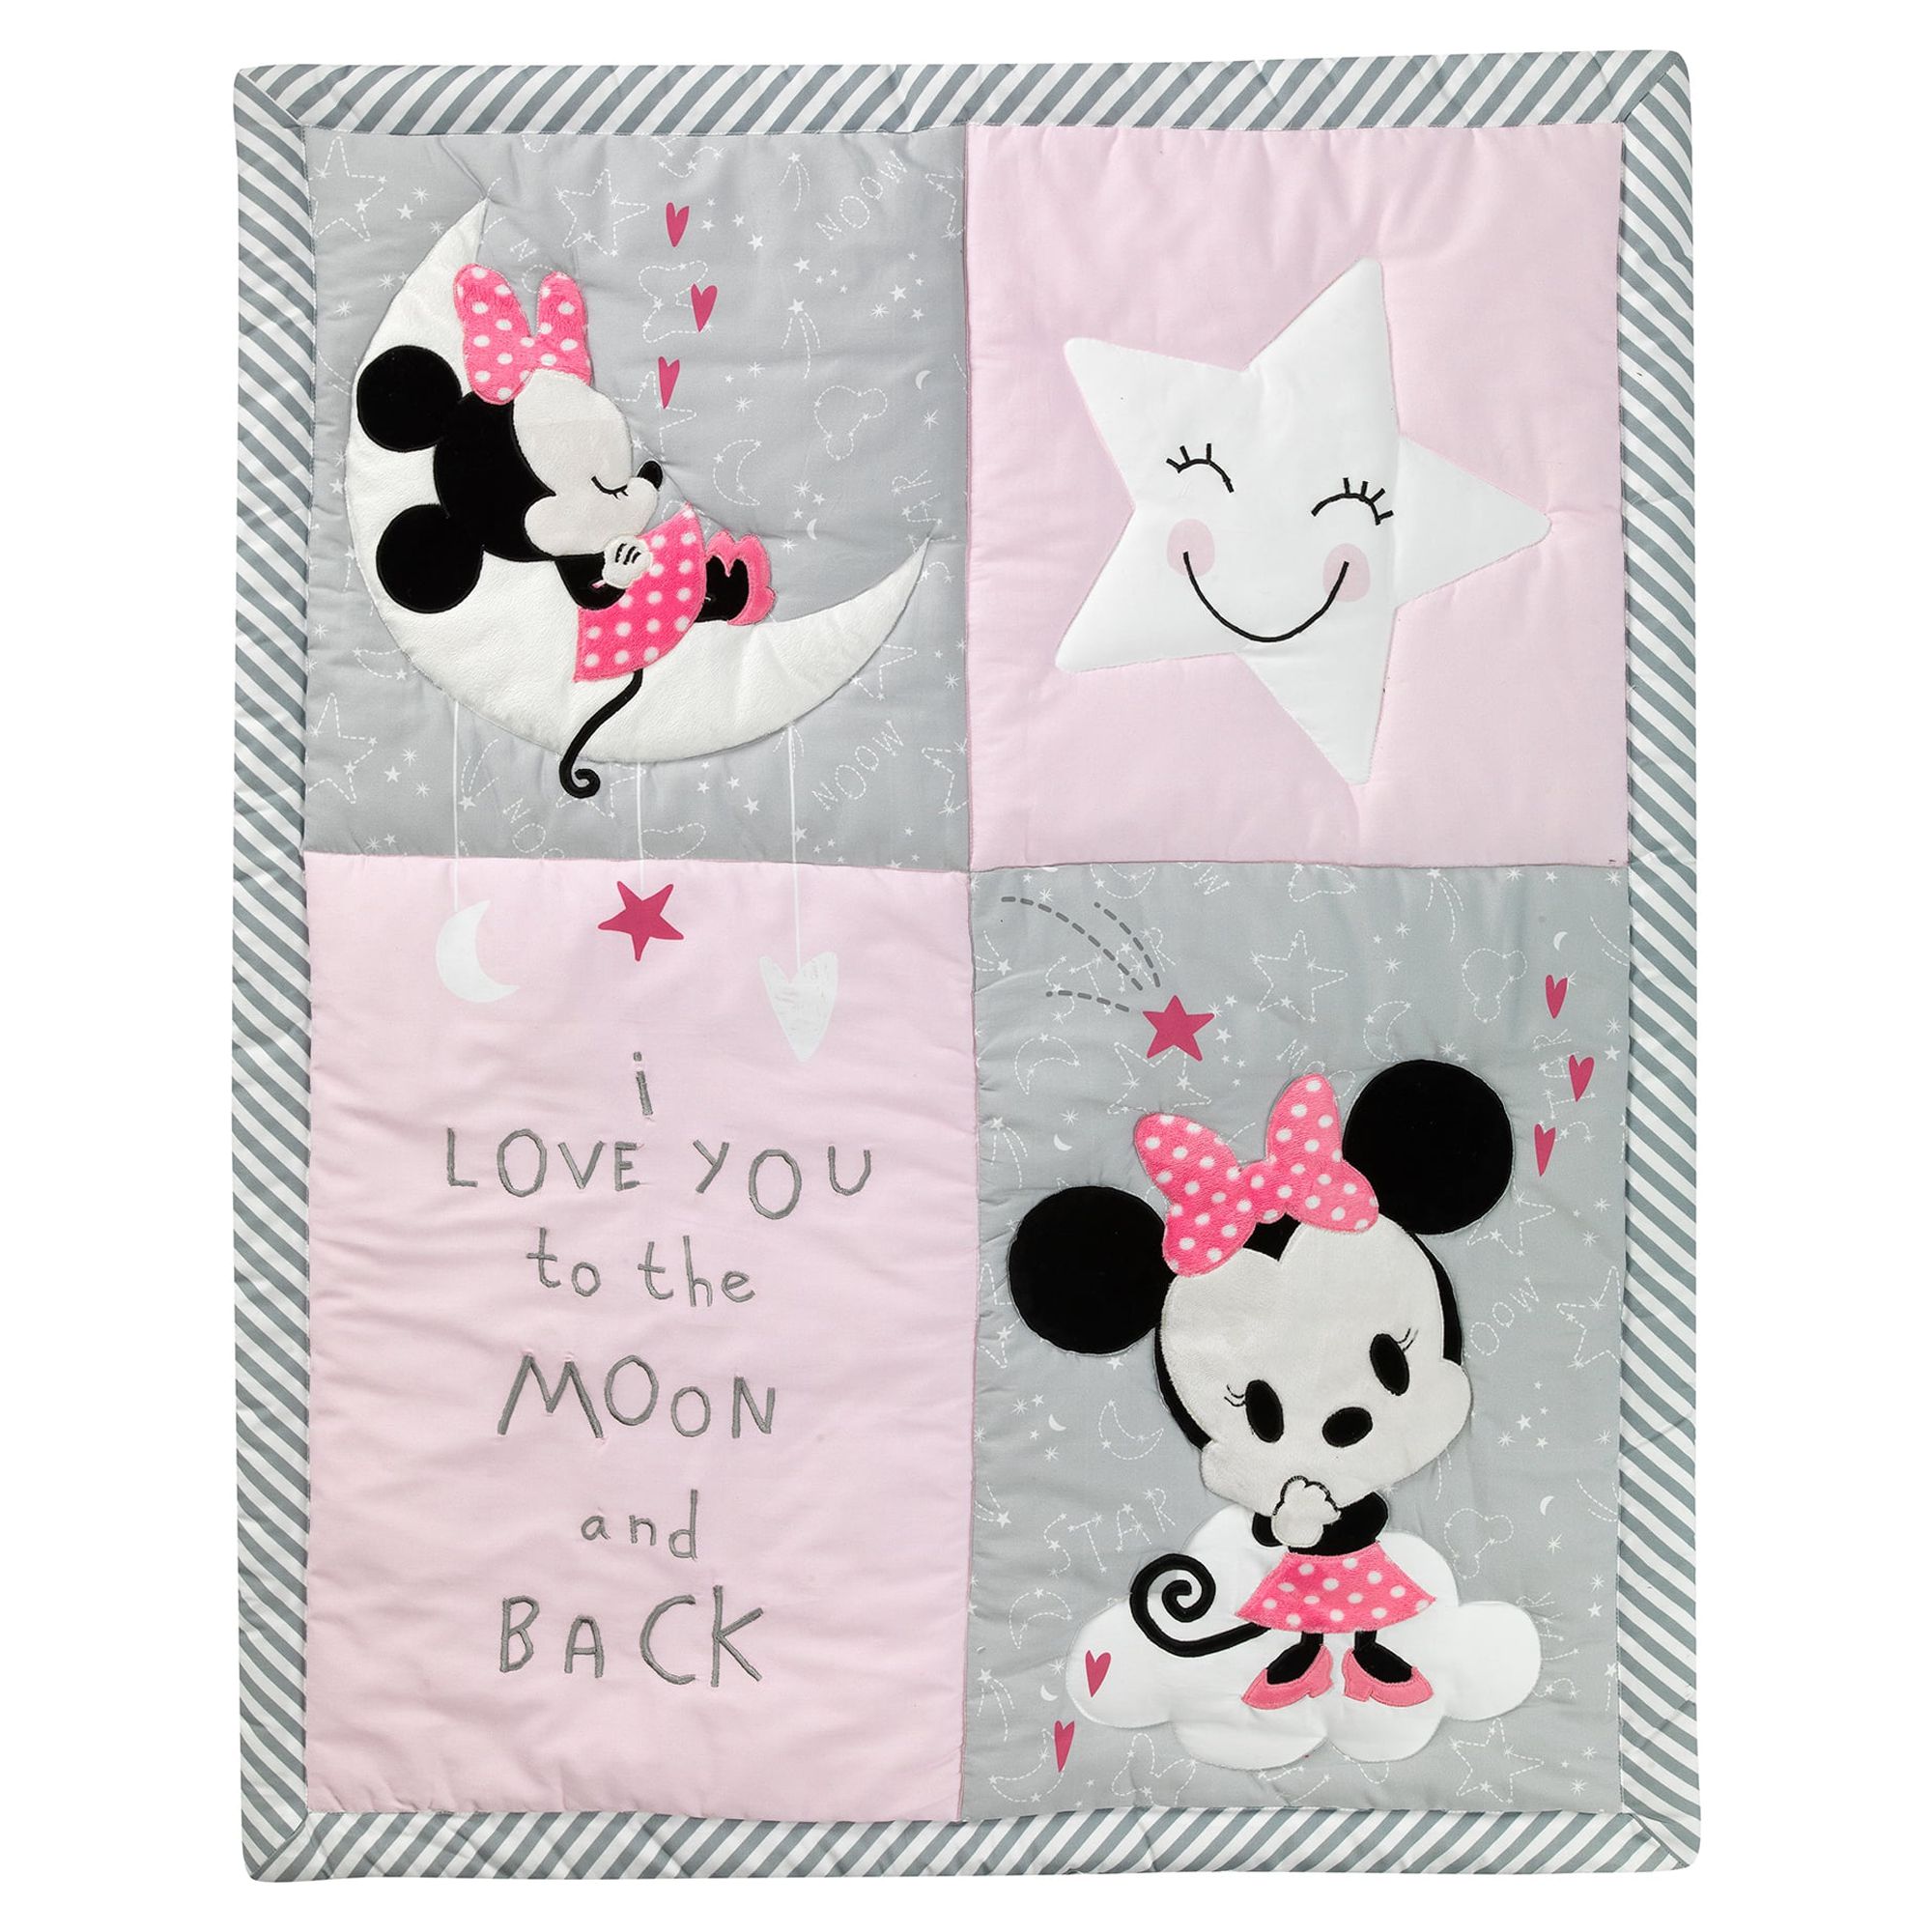 Disney Baby Minnie Mouse Pink 4-Piece Nursery Crib Bedding Set by Lambs & Ivy - image 3 of 8